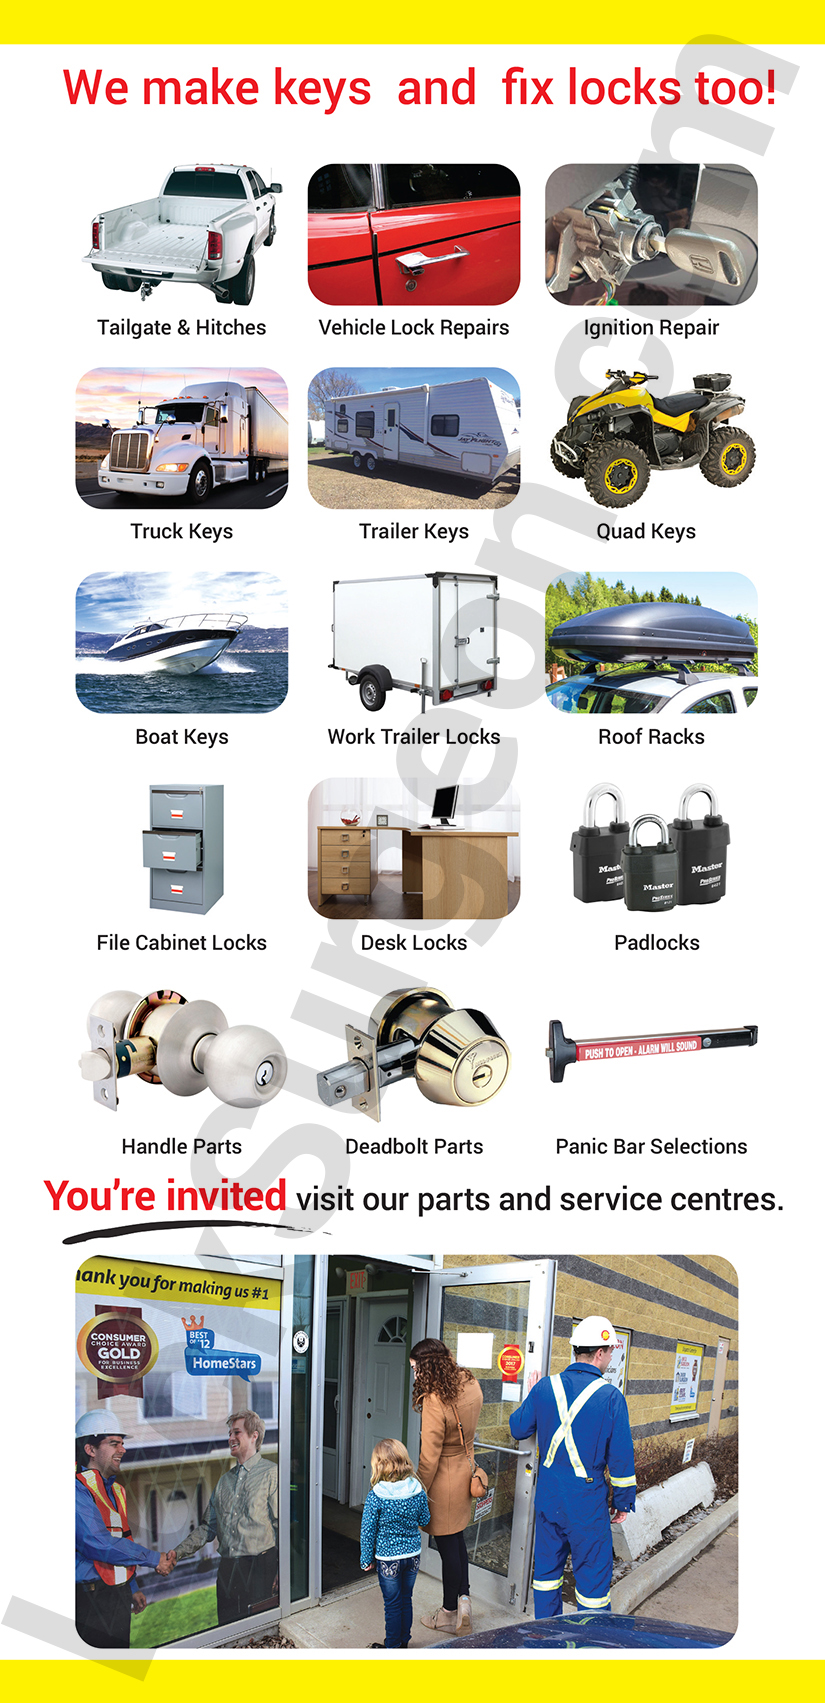 Lock Surgeon locksmith shop you are invited to visit our shop store service centre.